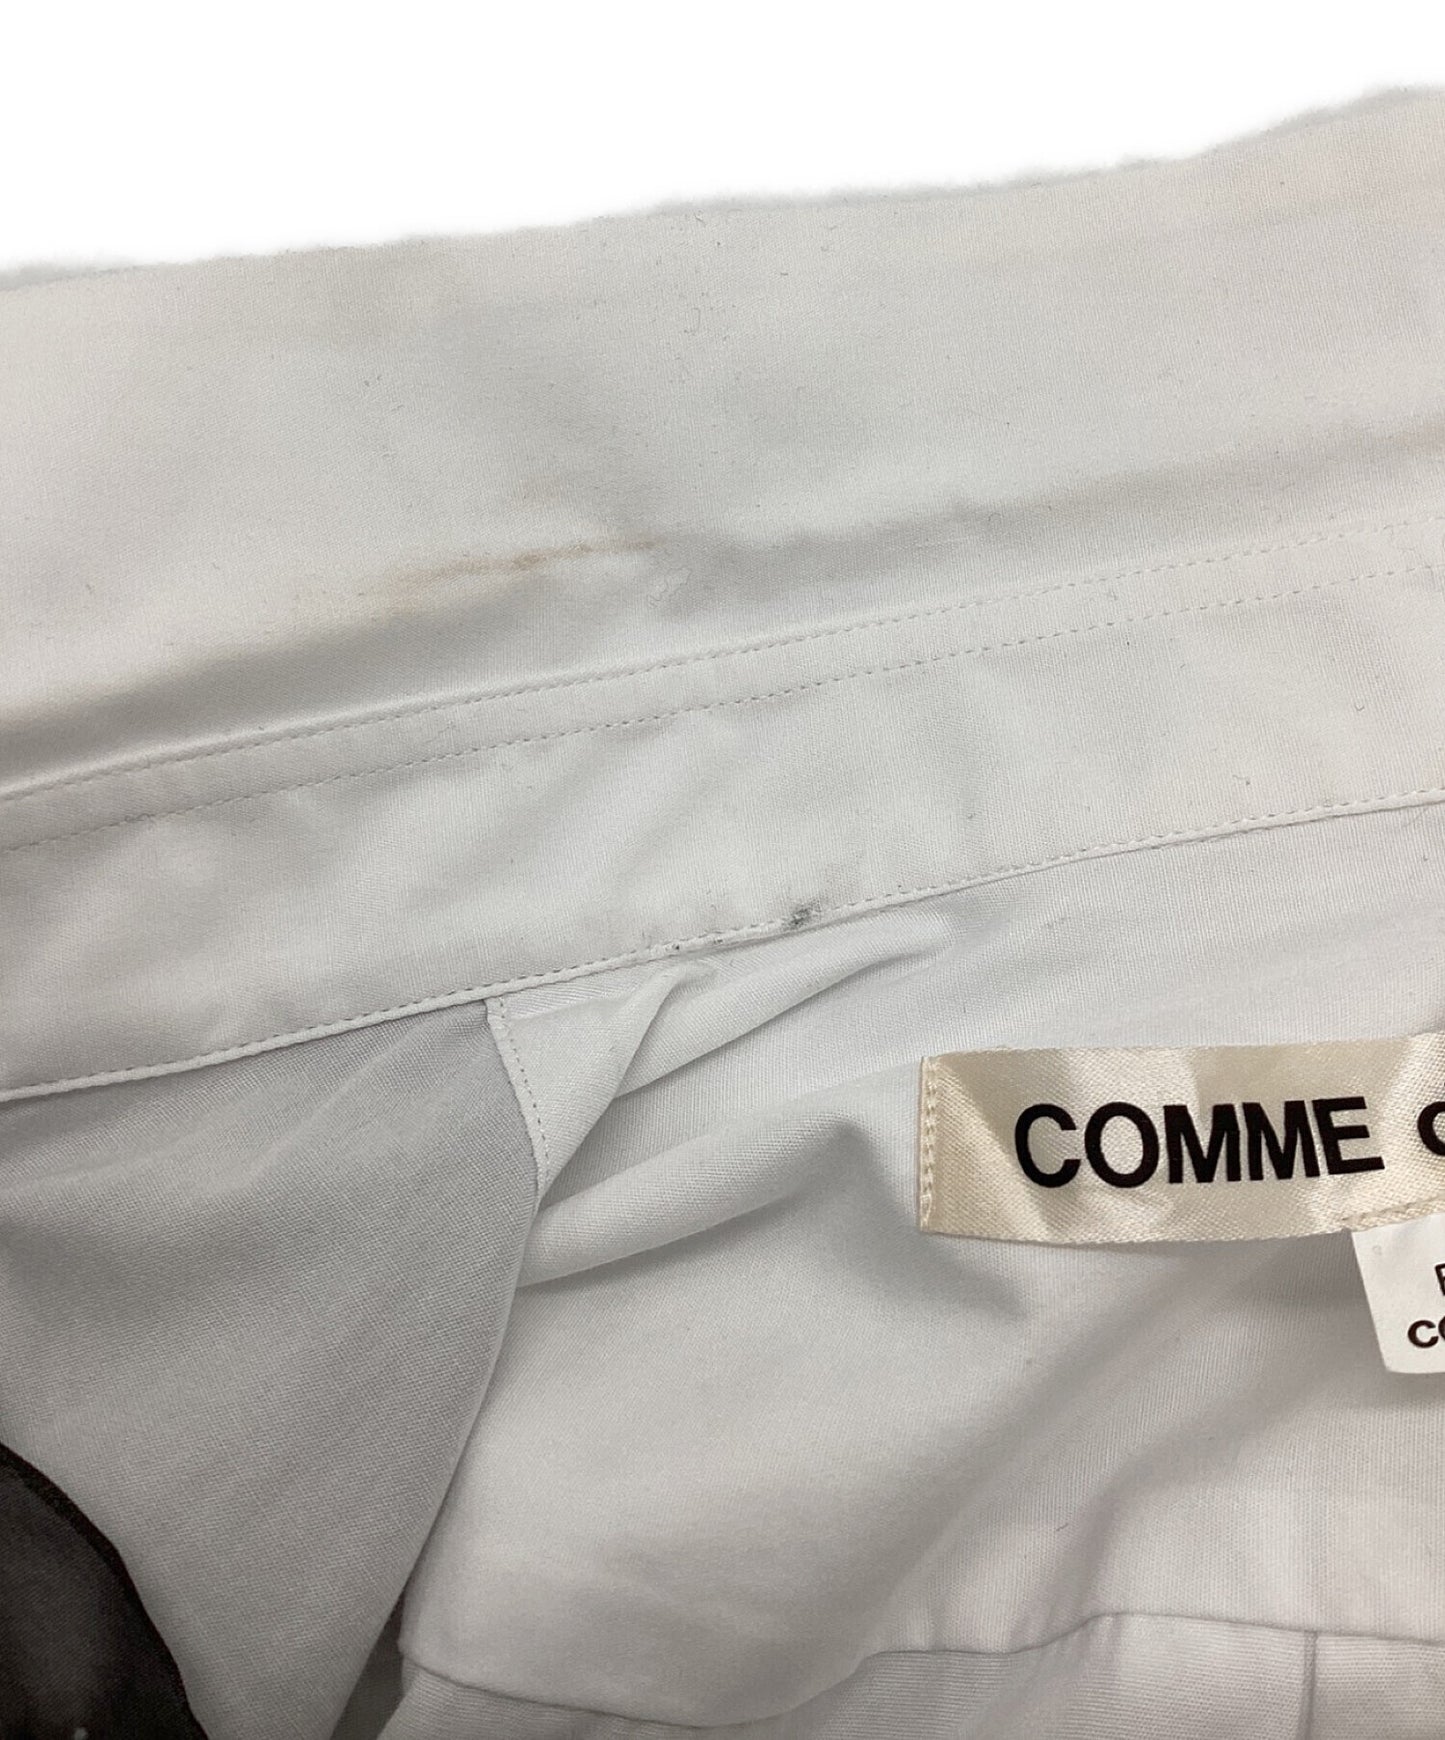 Comme des Garcons Organdy-Switched衬衫GD-B010